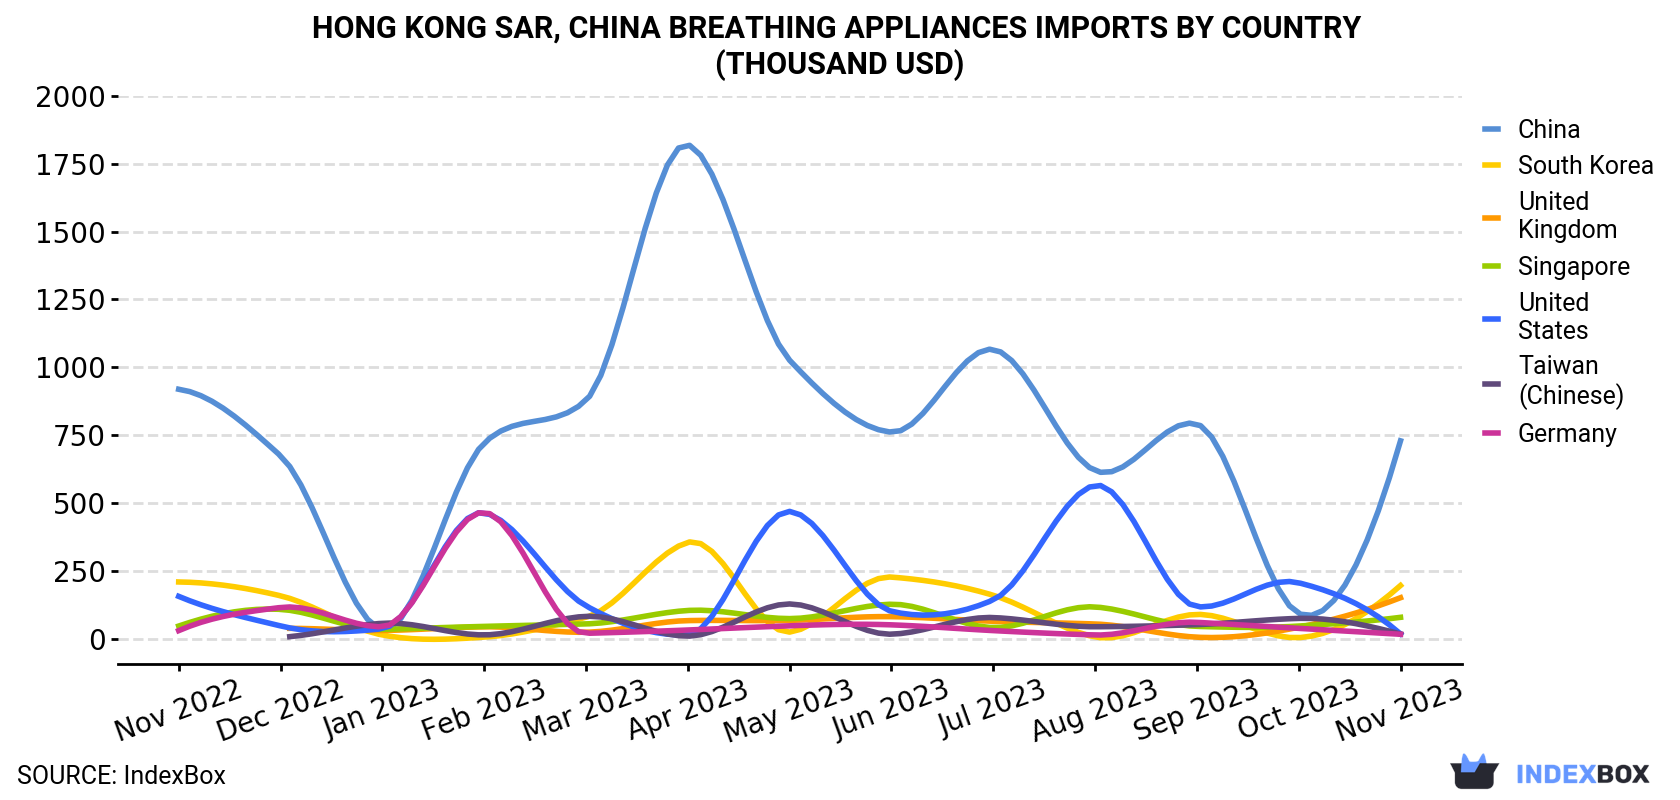 Hong Kong Breathing Appliances Imports By Country (Thousand USD)